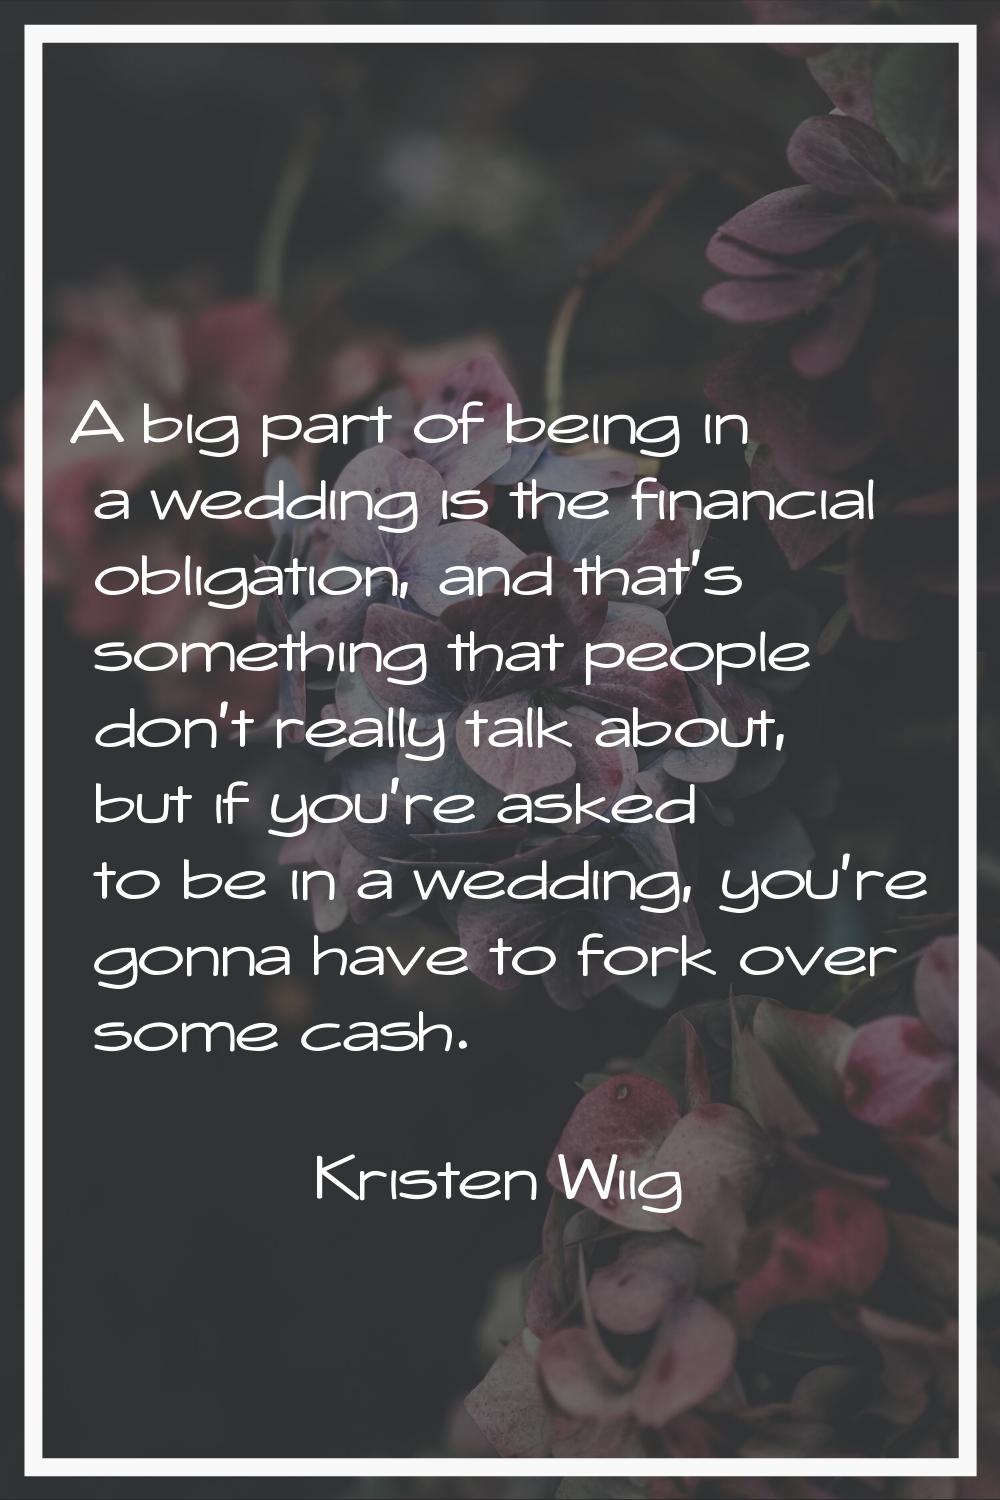 A big part of being in a wedding is the financial obligation, and that's something that people don'